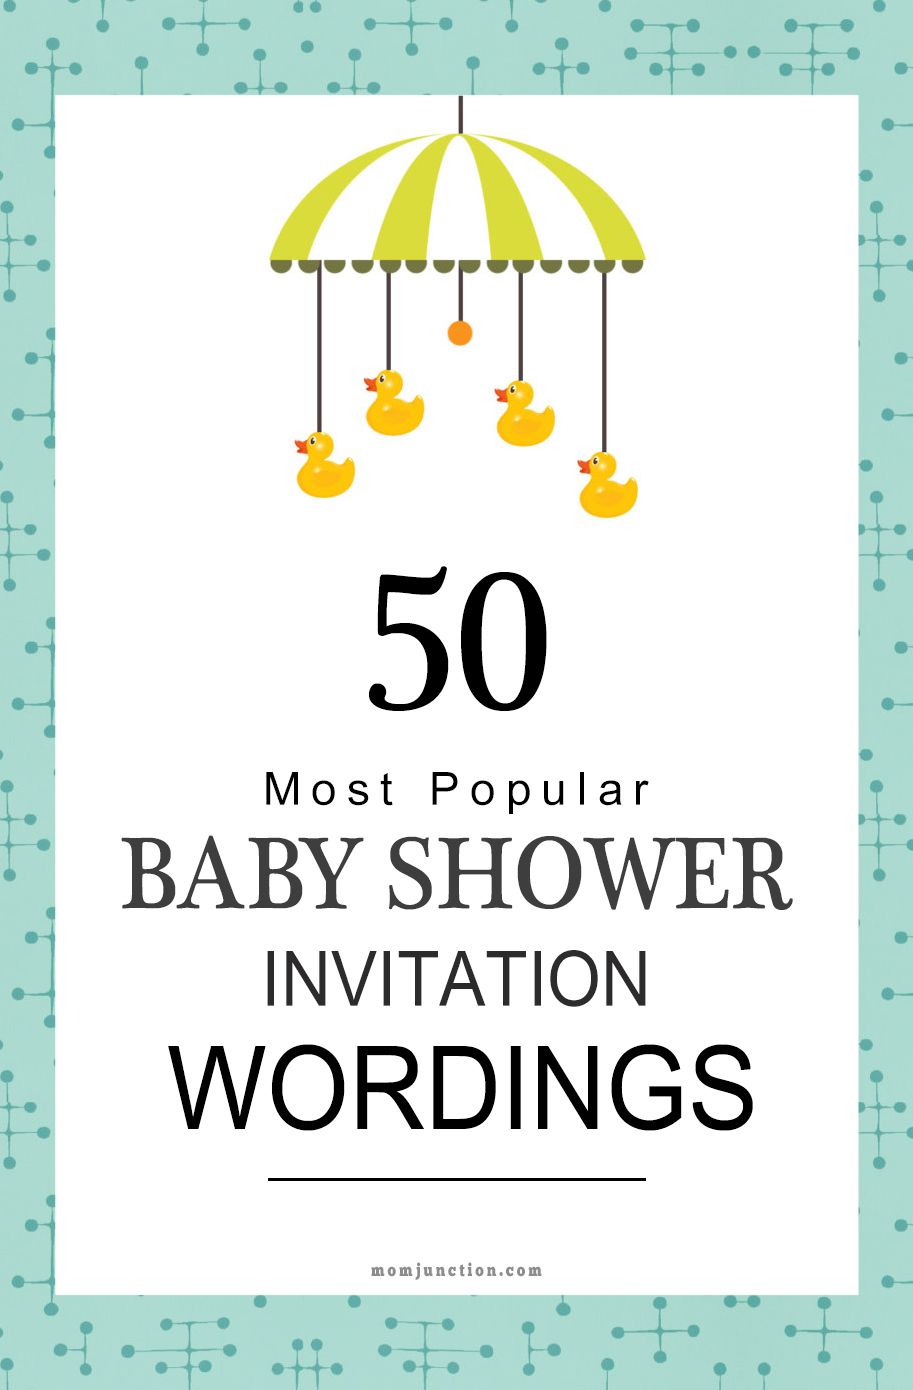 Full Size of Baby Shower:delightful Baby Shower Invitation Wording Picture Designs Arreglos Baby Shower Niño Books For Baby Shower Unique Baby Shower Favors Baby Shower Outfit Guest